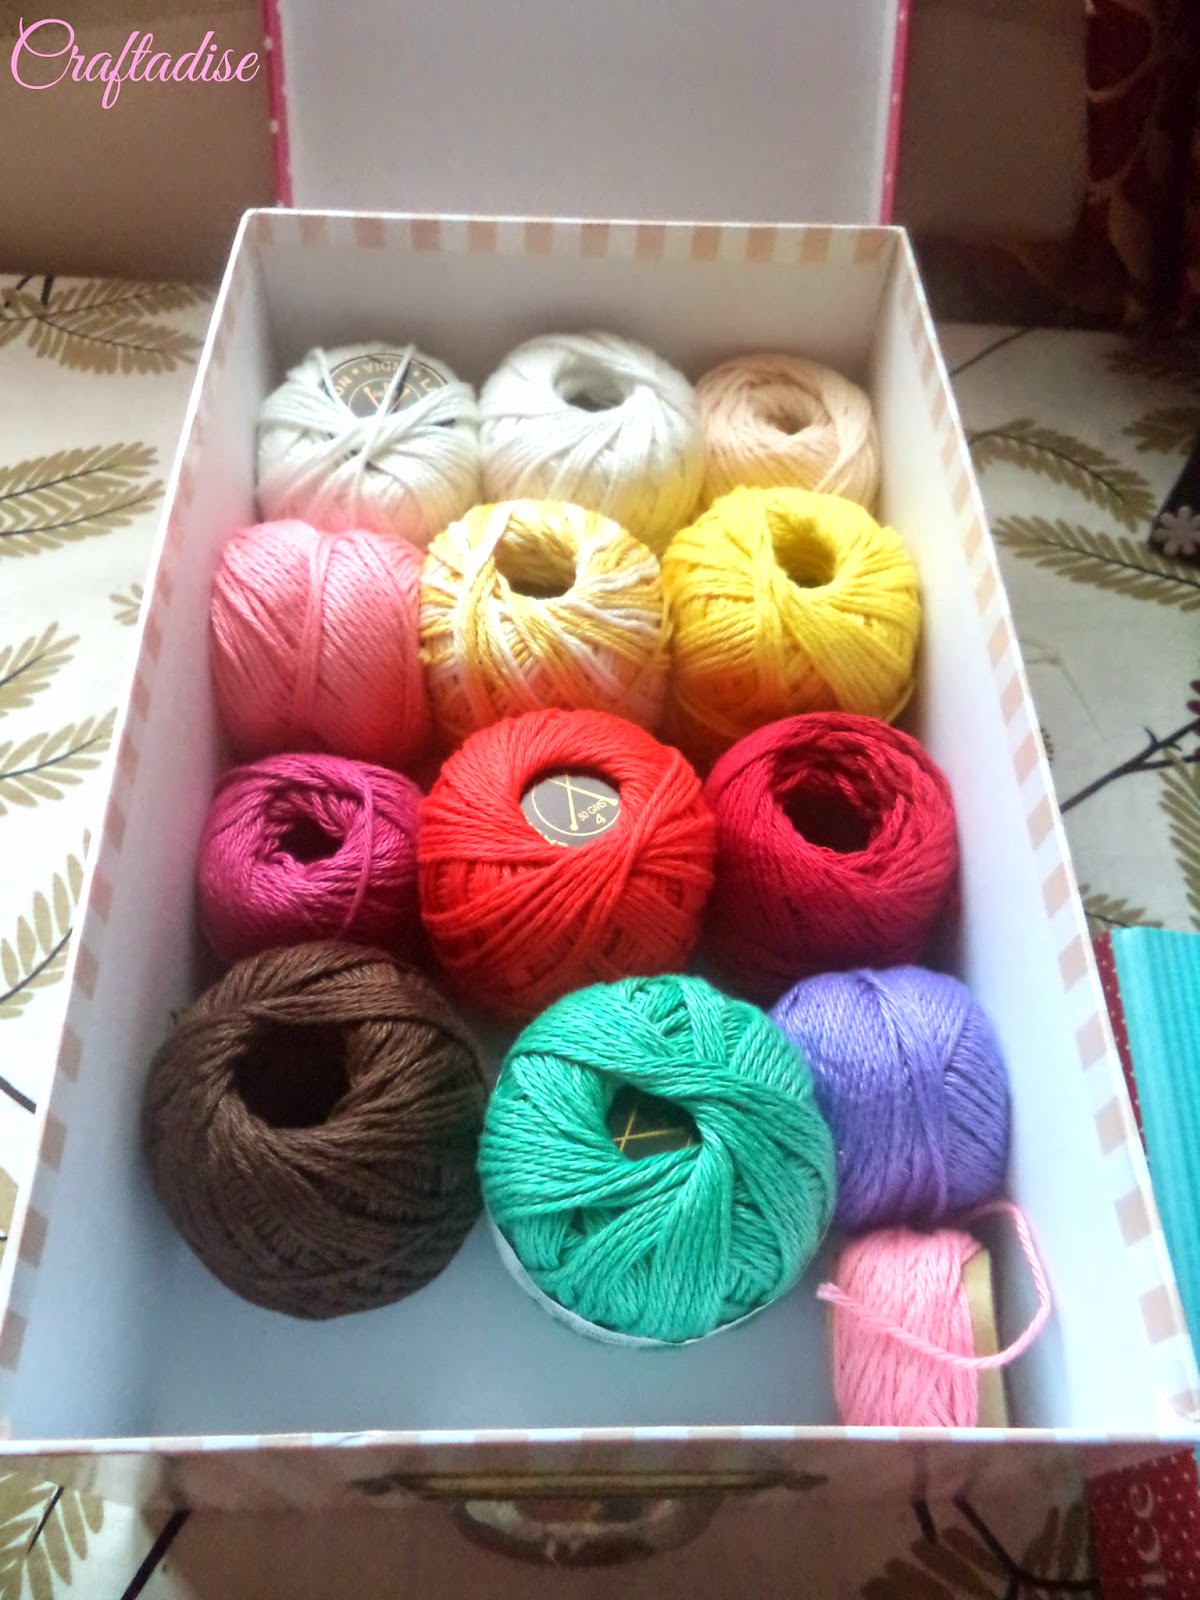 Organizing and Storing Cotton Yarn in a Cardboard Box